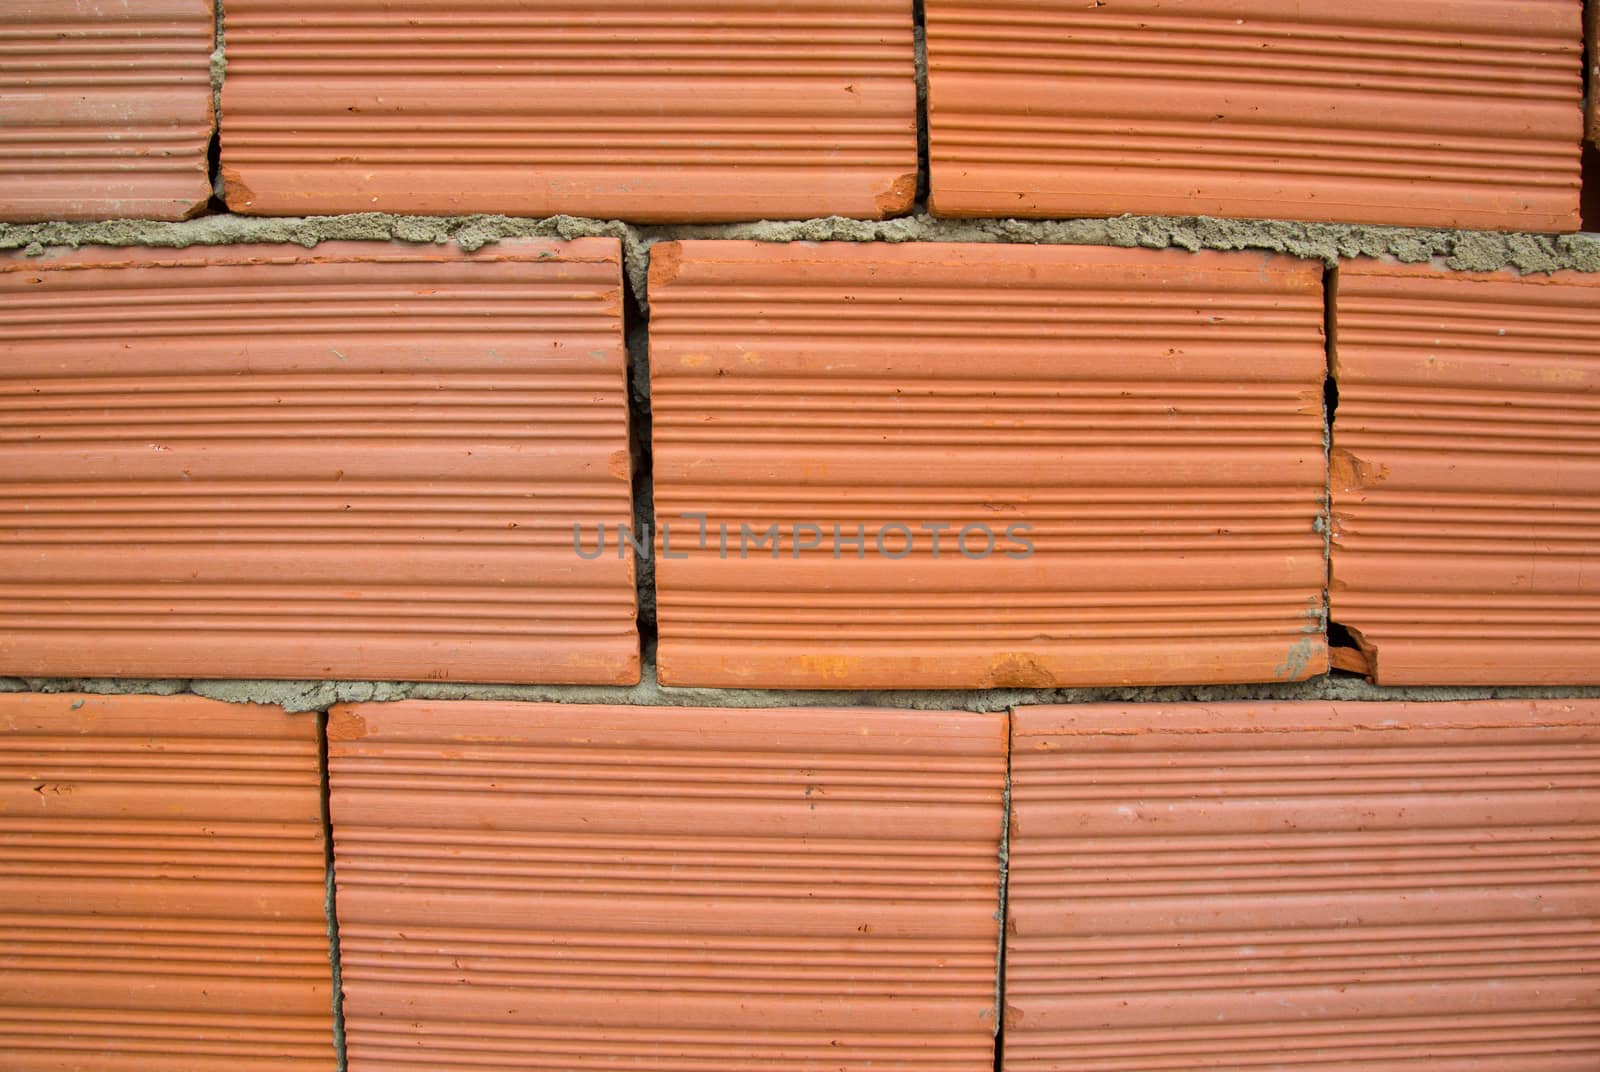 Red clay bricks - background by tolikoff_photography